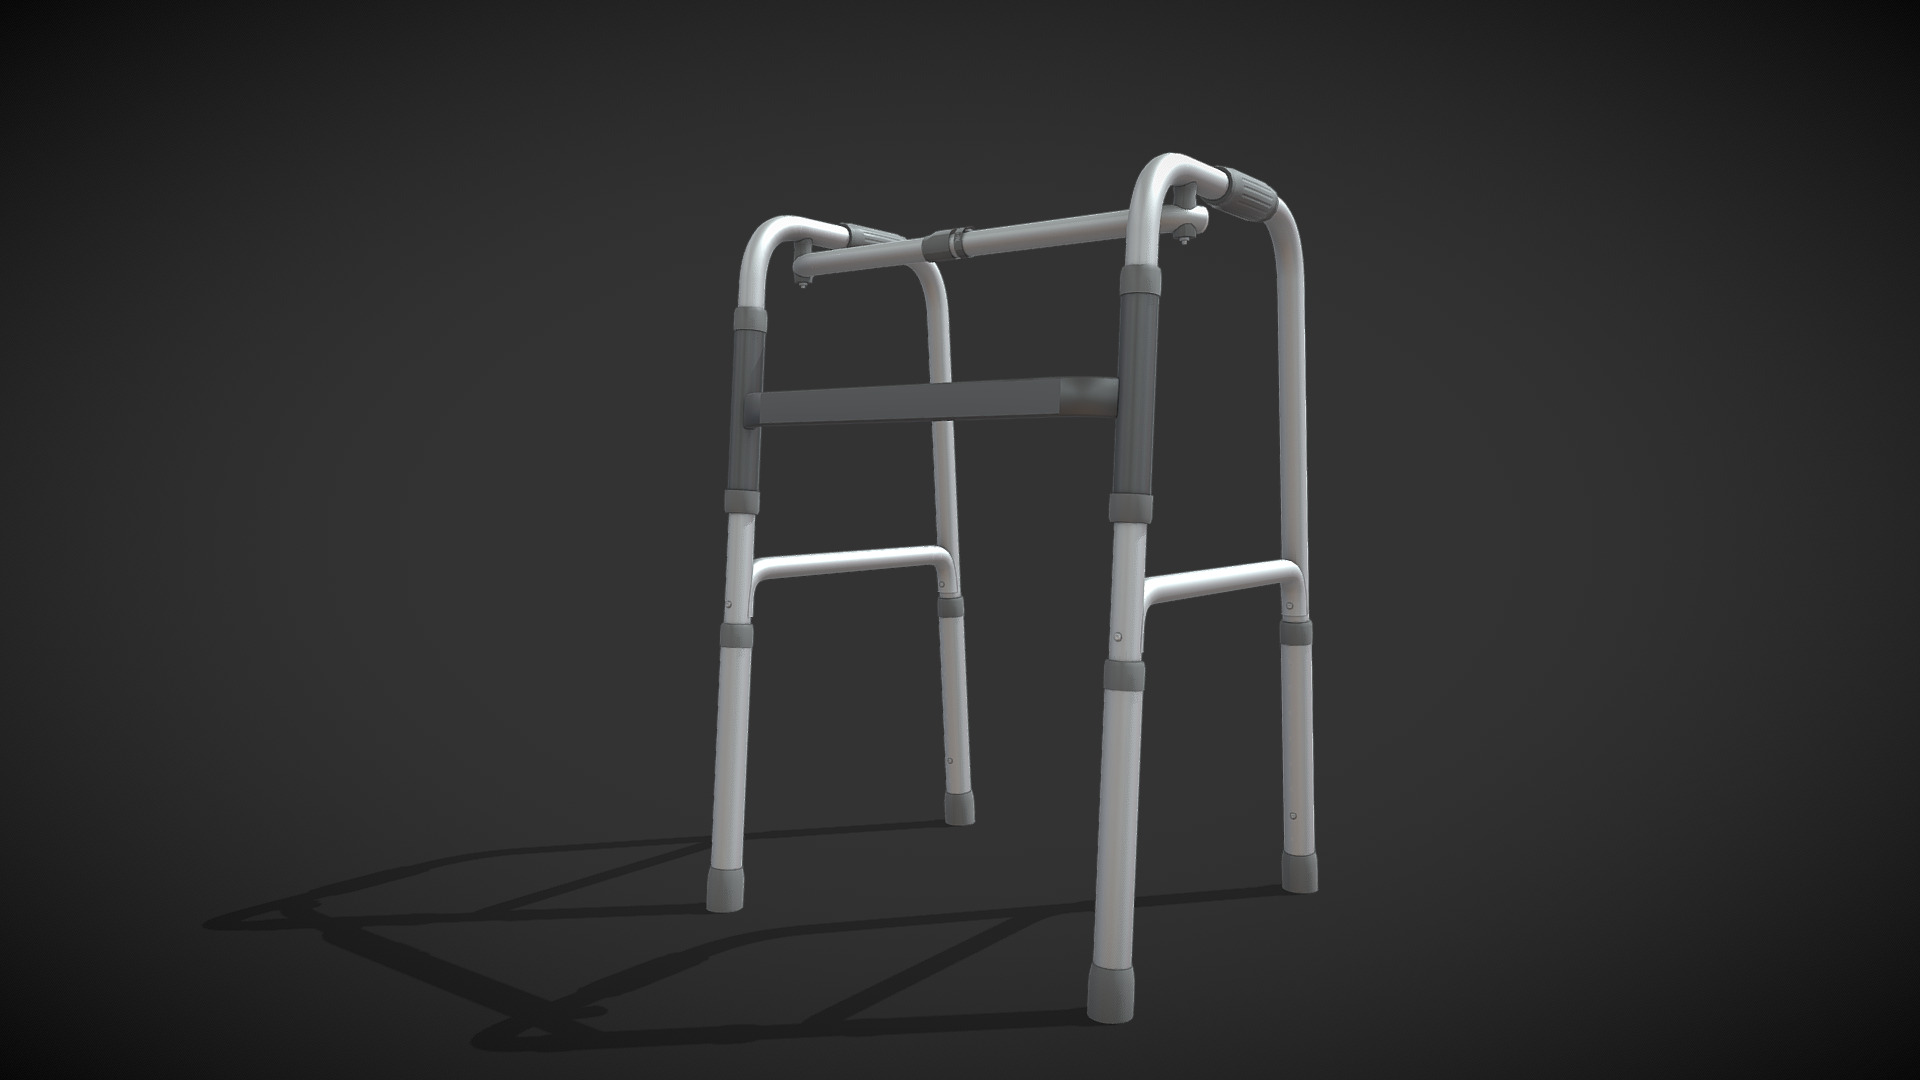 Old man walker aids 4 legs alluminium is walking equipment ideal for uneven/outdoor terrain. This 3d model originally crated on Blender 2.79b.


It's have clean typology and unwrapped correctly.
It's have realistic style ready for your real time project.
6328 tris, 3474 verts.

It's contain texture with png format,
- Diffuse / albedo 2048 pixel.
- Ambient oclussion 4096 pixel.
- Diffuse with ambient oclussion mixed 4096 pixel.
- Normal map 4096 pixel.
- Roughness 2048 pixel.
- Specular 2048 pixel.
- Metalness 2048 pixel.

I also have another walking aids 3d model on my collection 3d model